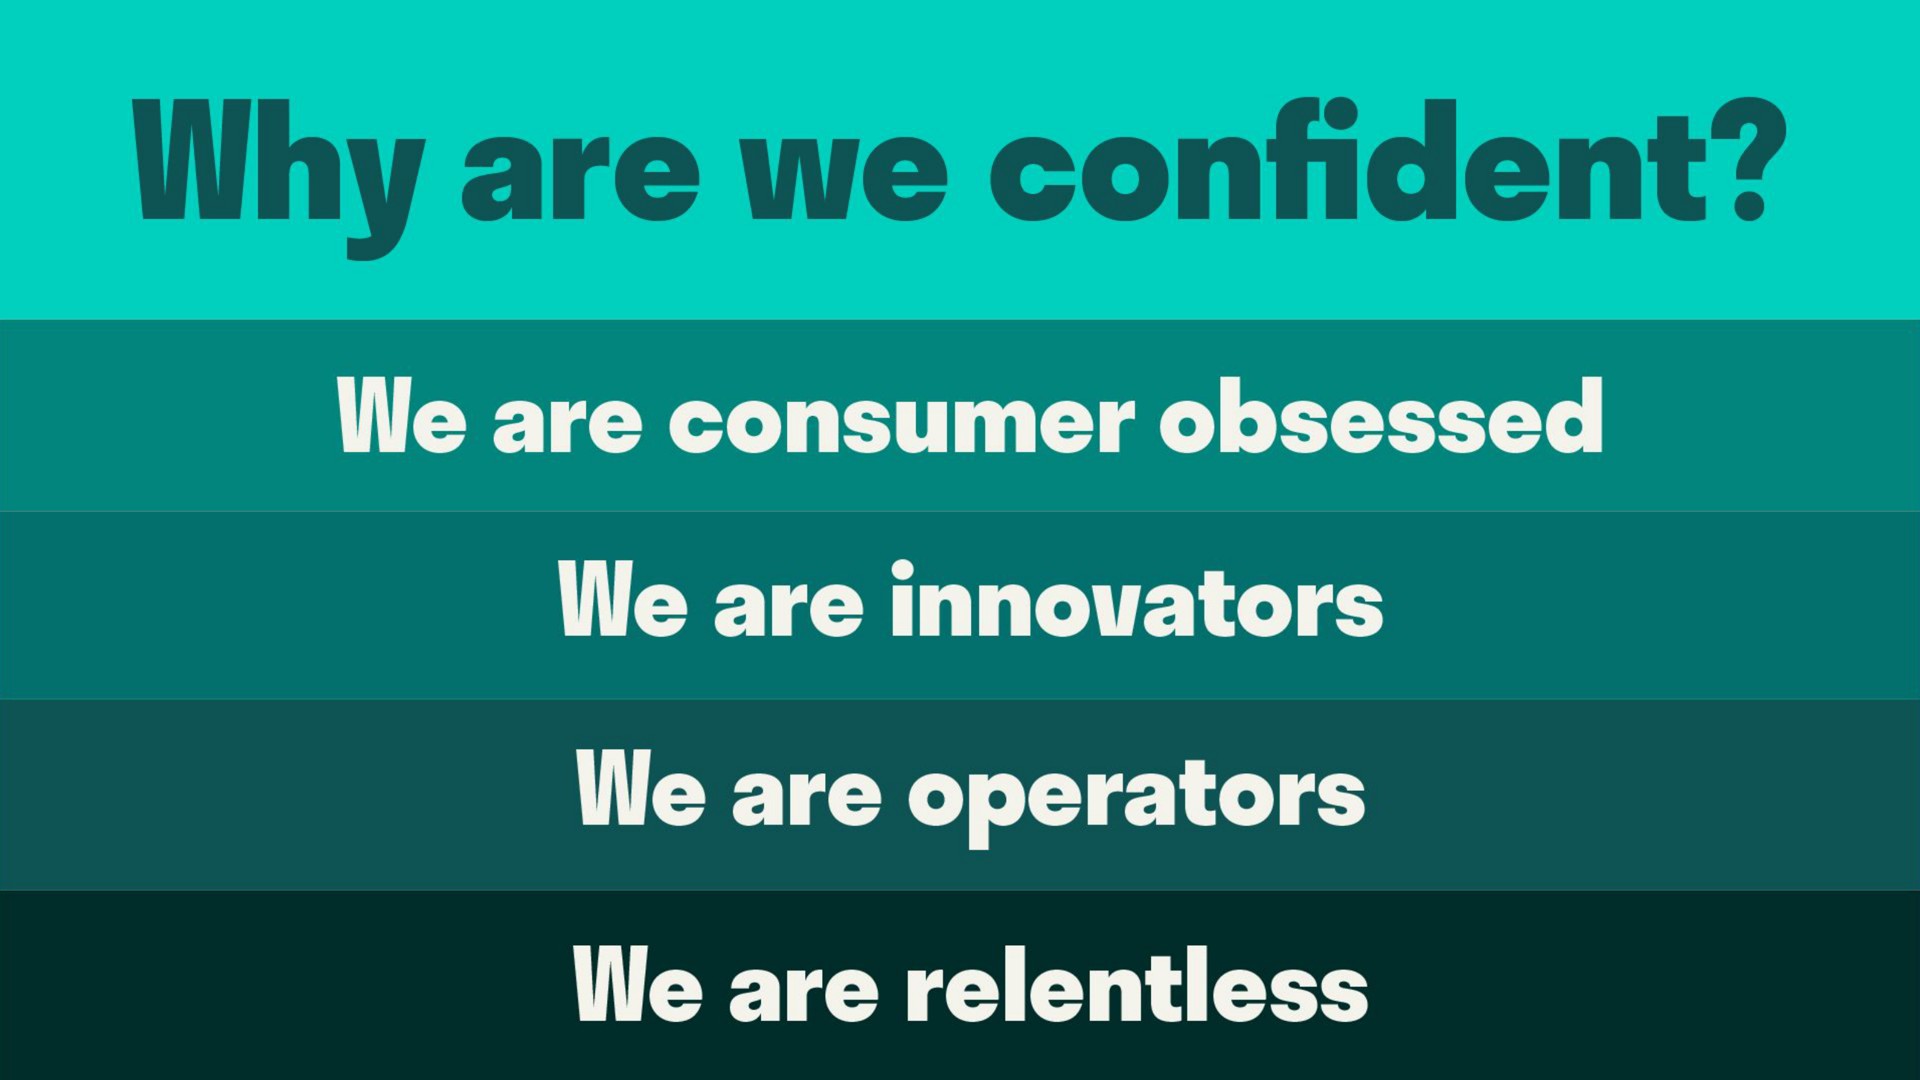 why are we confident we are consumer obsessed we are innovators we are operators we are relentless | Deliveroo